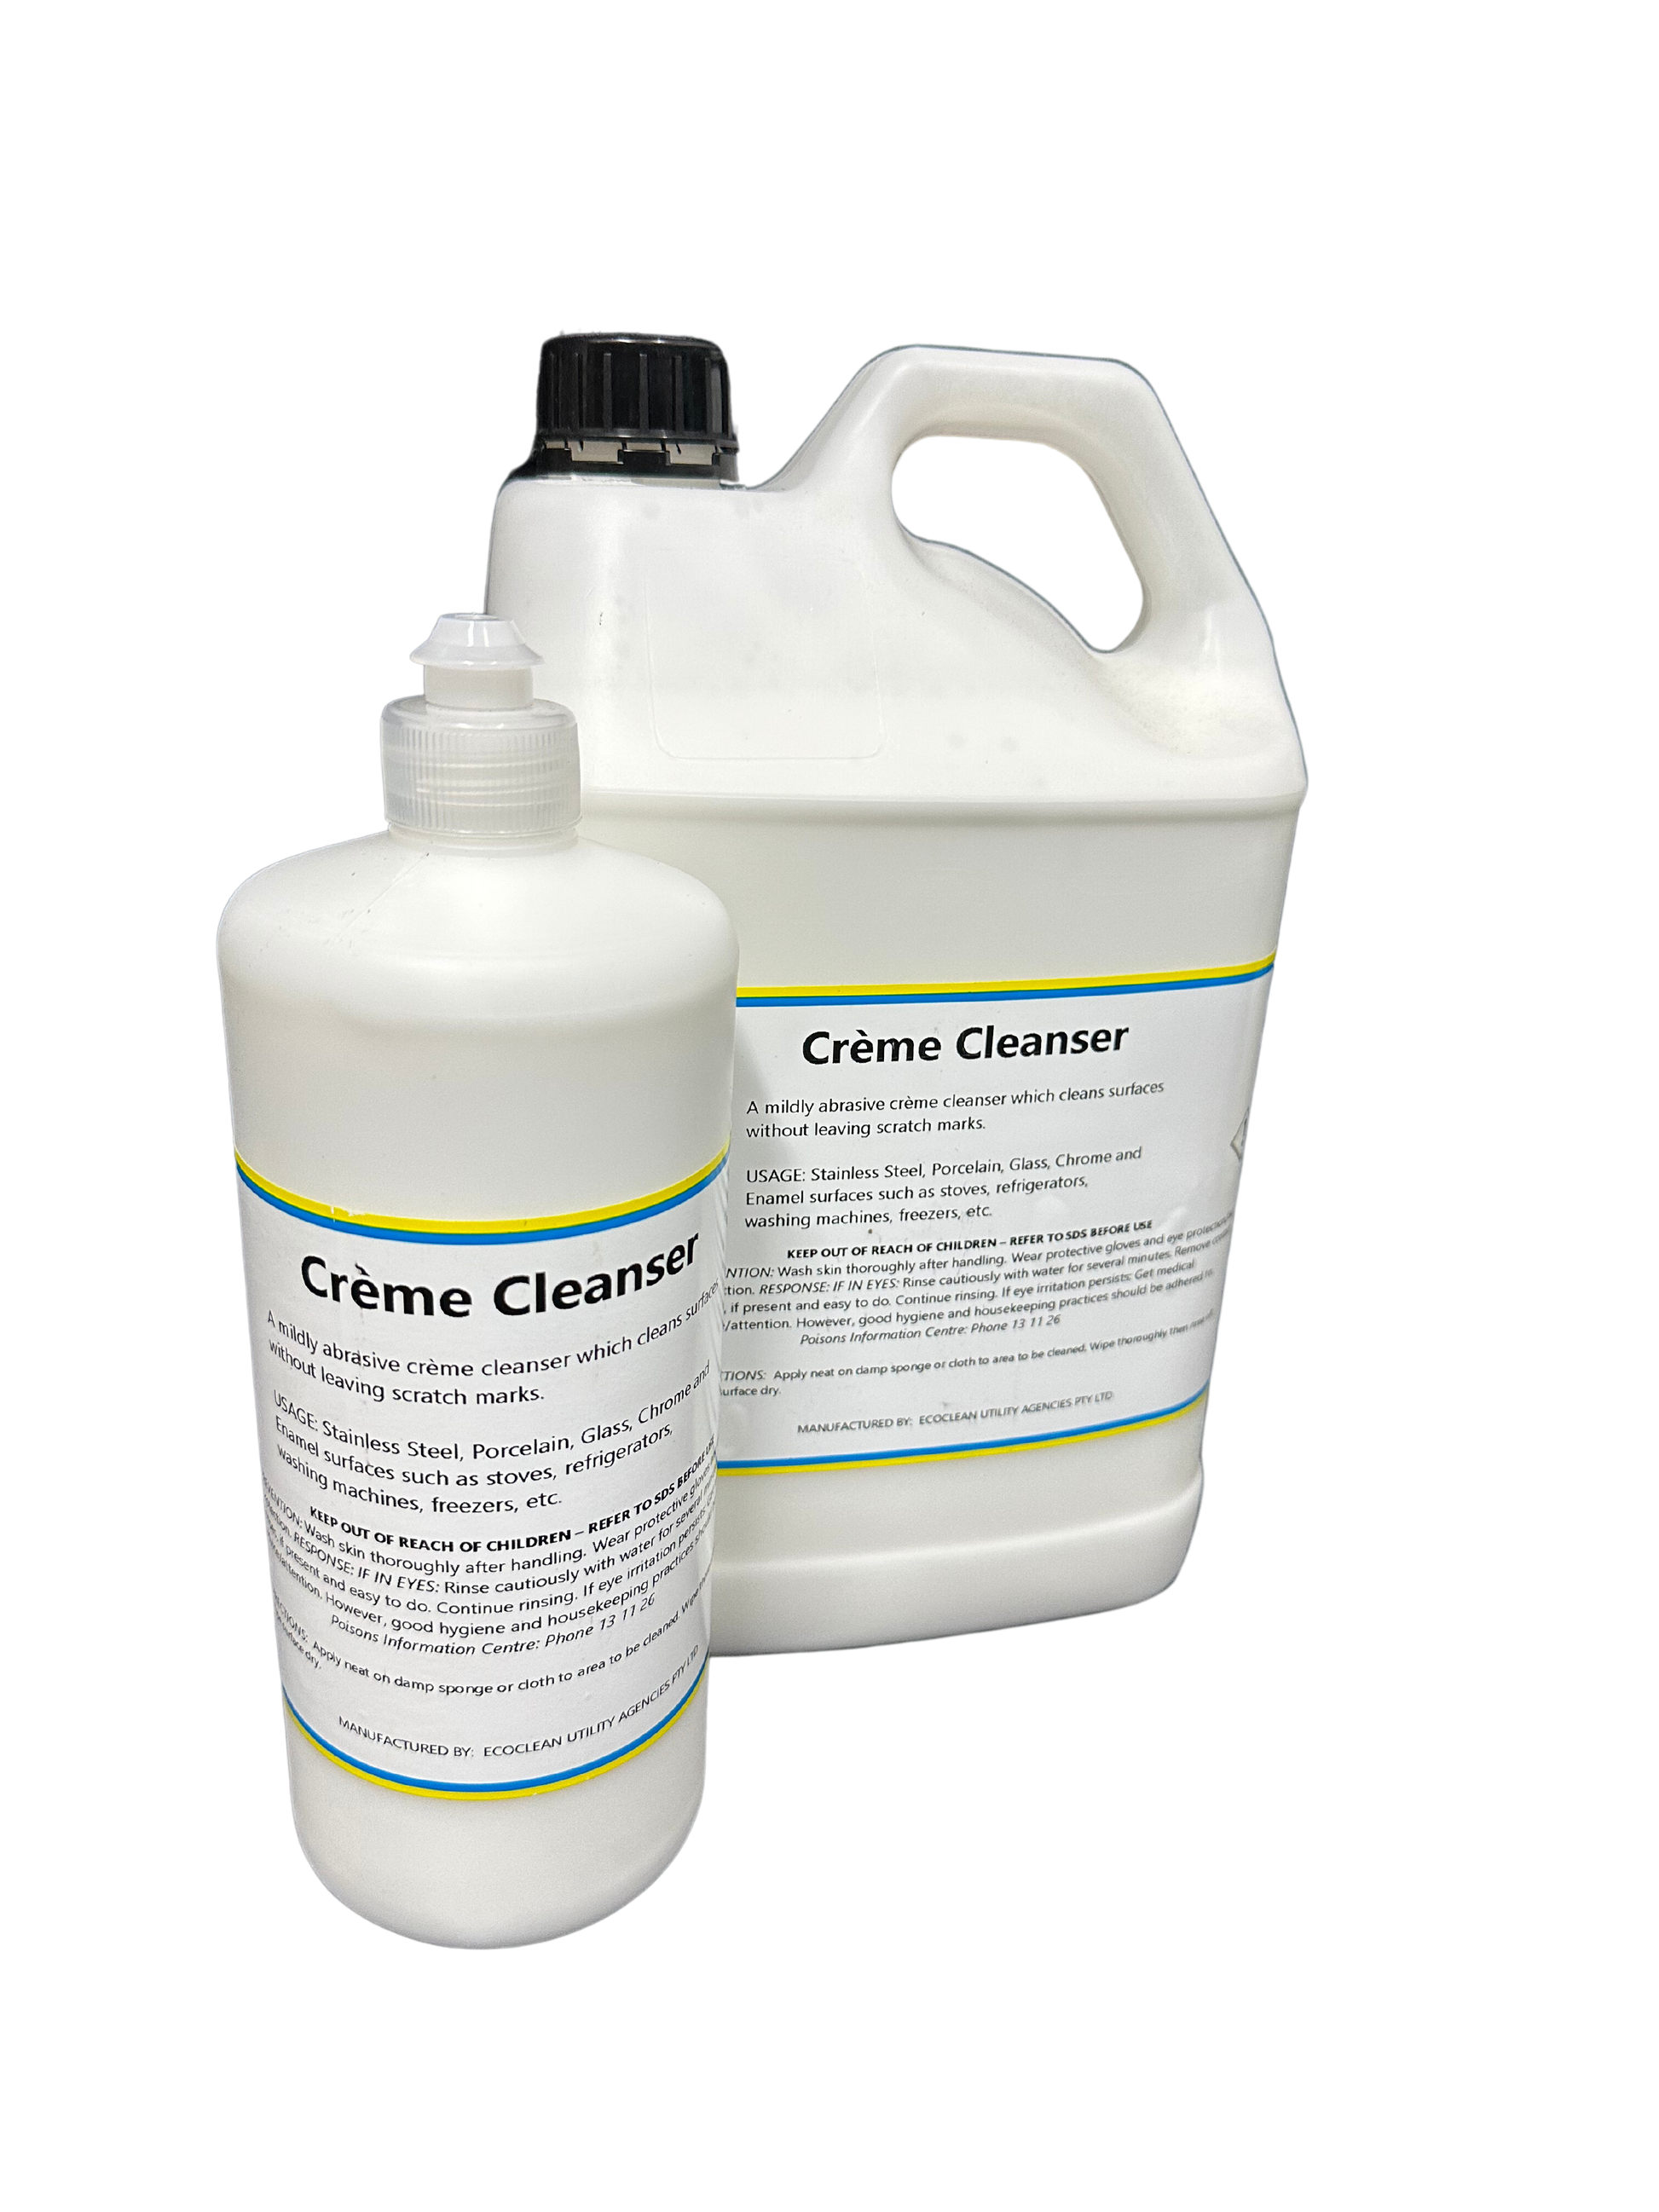 Cream Cleanser: Removes dirt, stains, and grime from home surfaces. Thick, creamy consistency. Ideal for kitchen and bathroom surfaces like sinks, countertops, and tiles. Effectively tackles grease, soap scum, and more. Gentle abrasiveness for thorough cleaning. Suitable for stainless steel, porcelain, glass, chrome, and enamel surfaces. Mackay